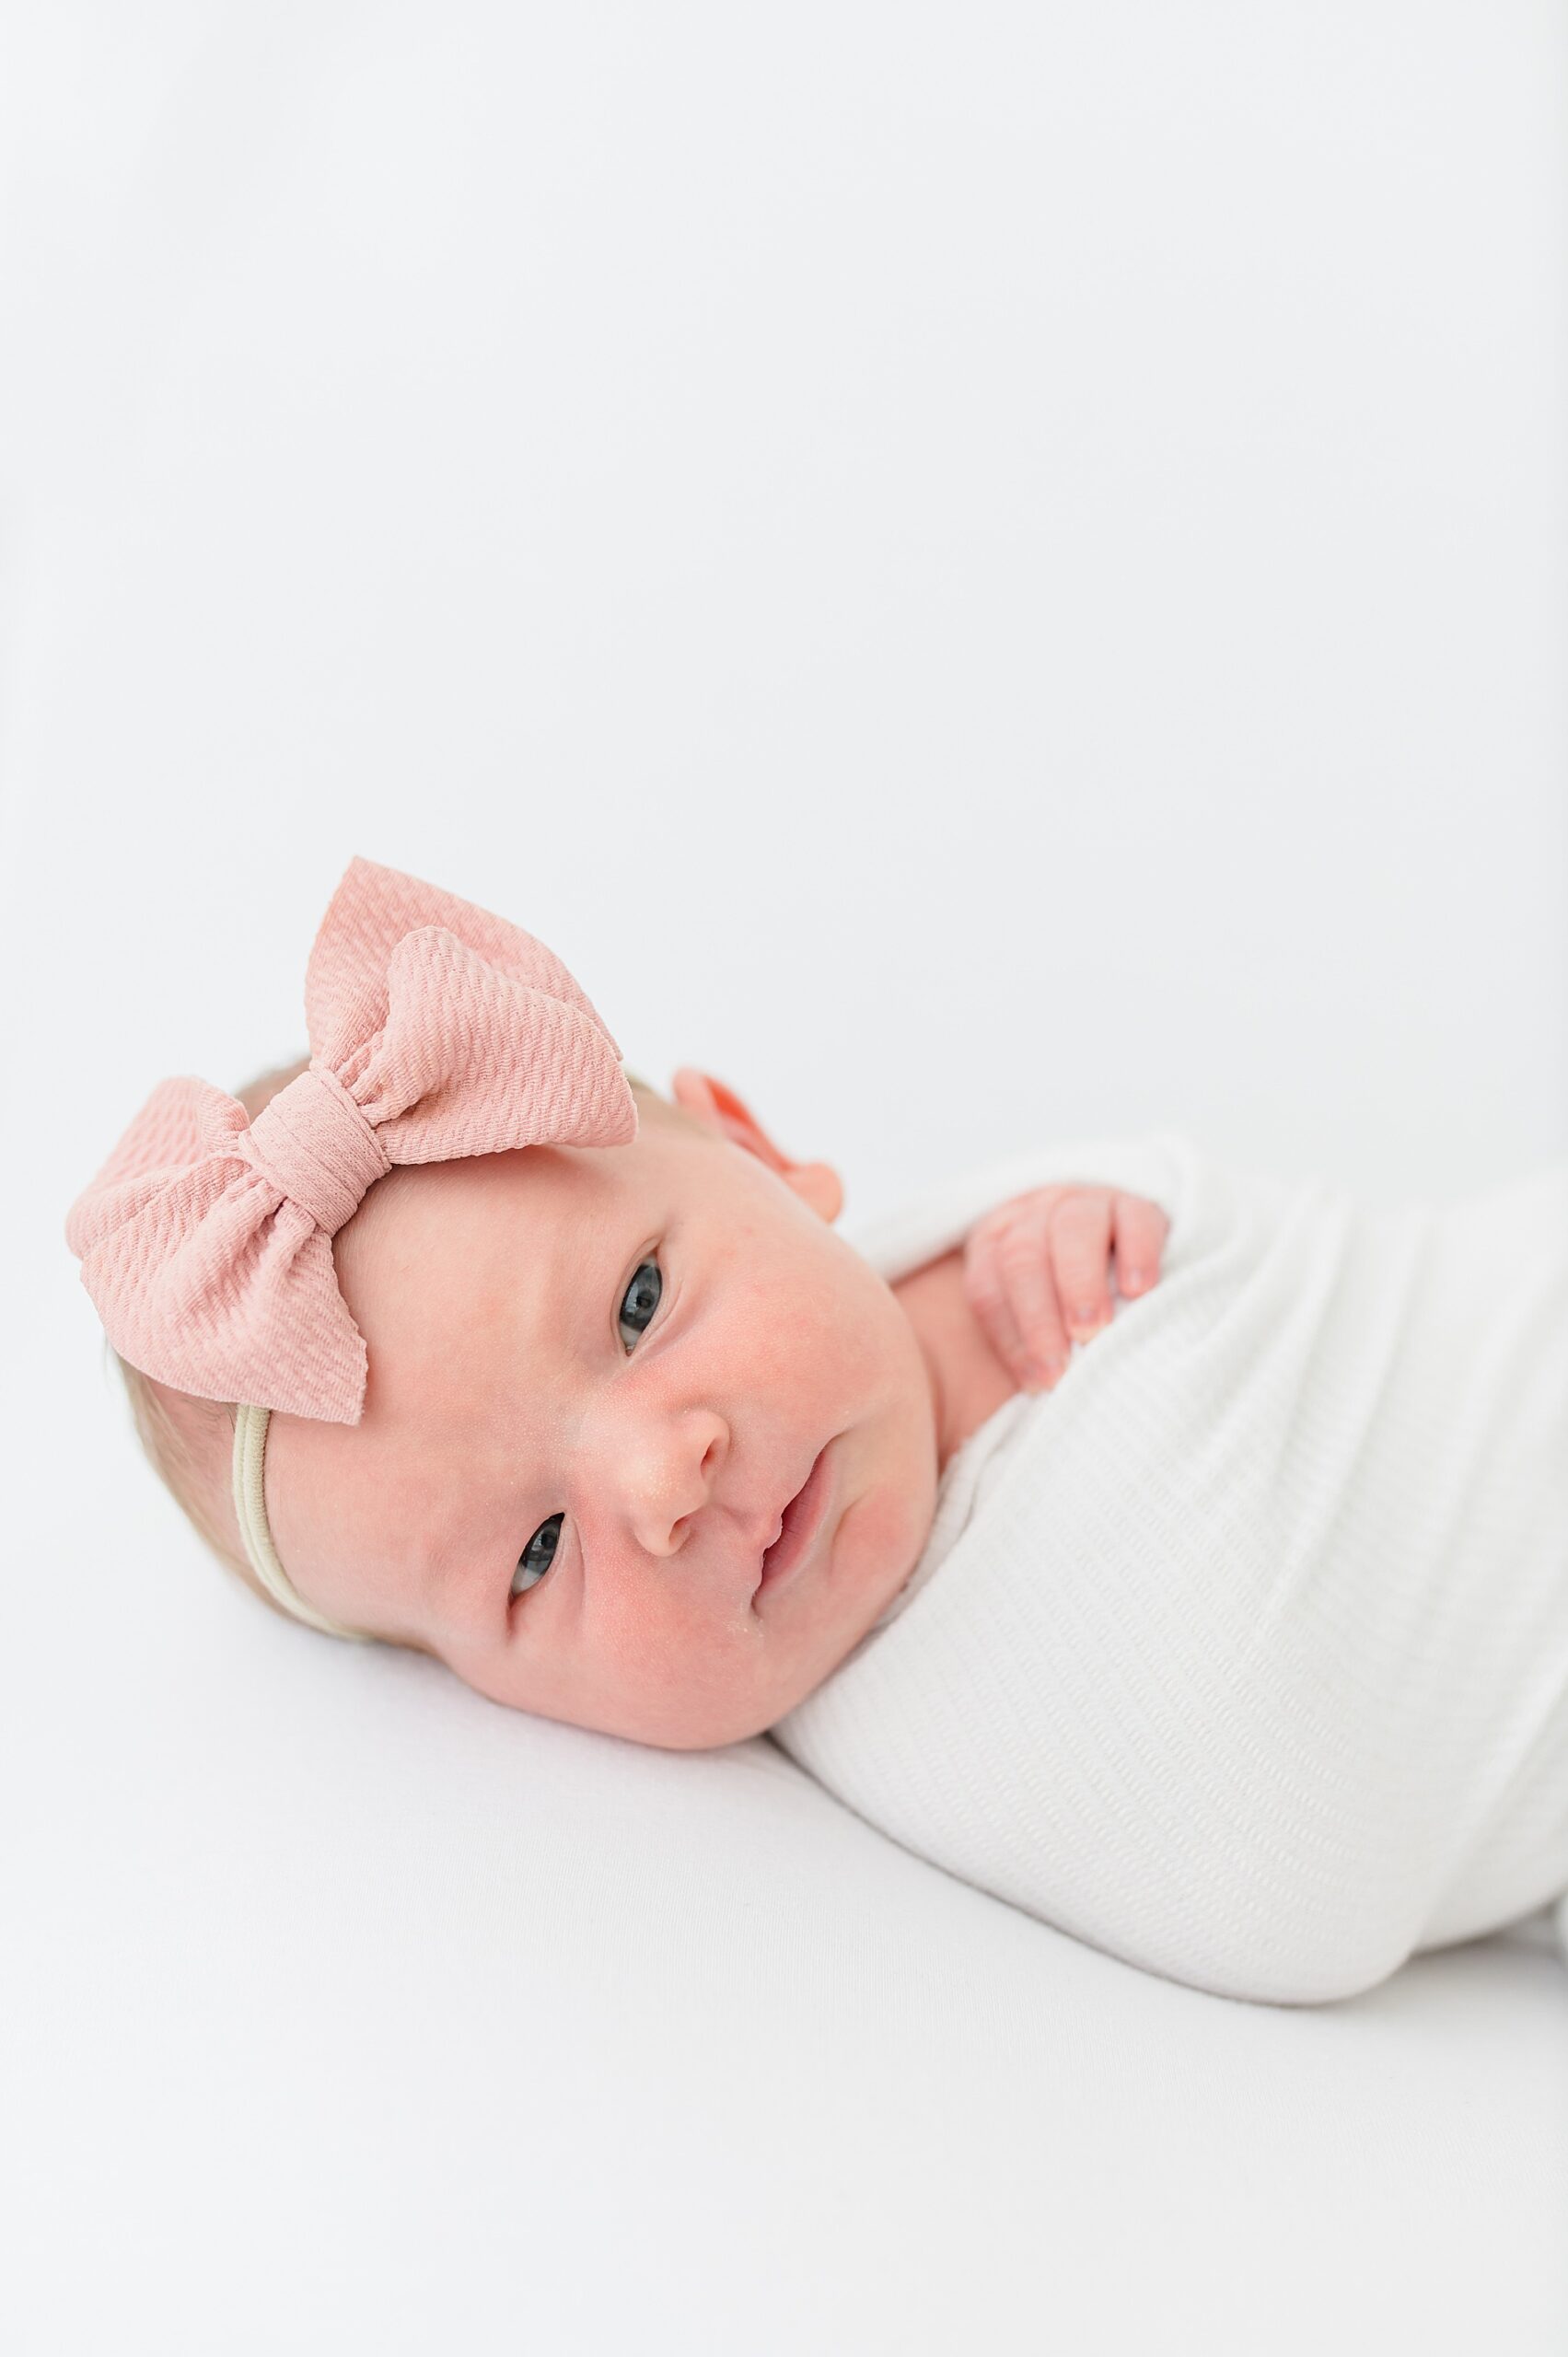 The Importance of Documenting Your Baby's First Year by Dallas Newborn Photographer Lindsey Dutton Photography